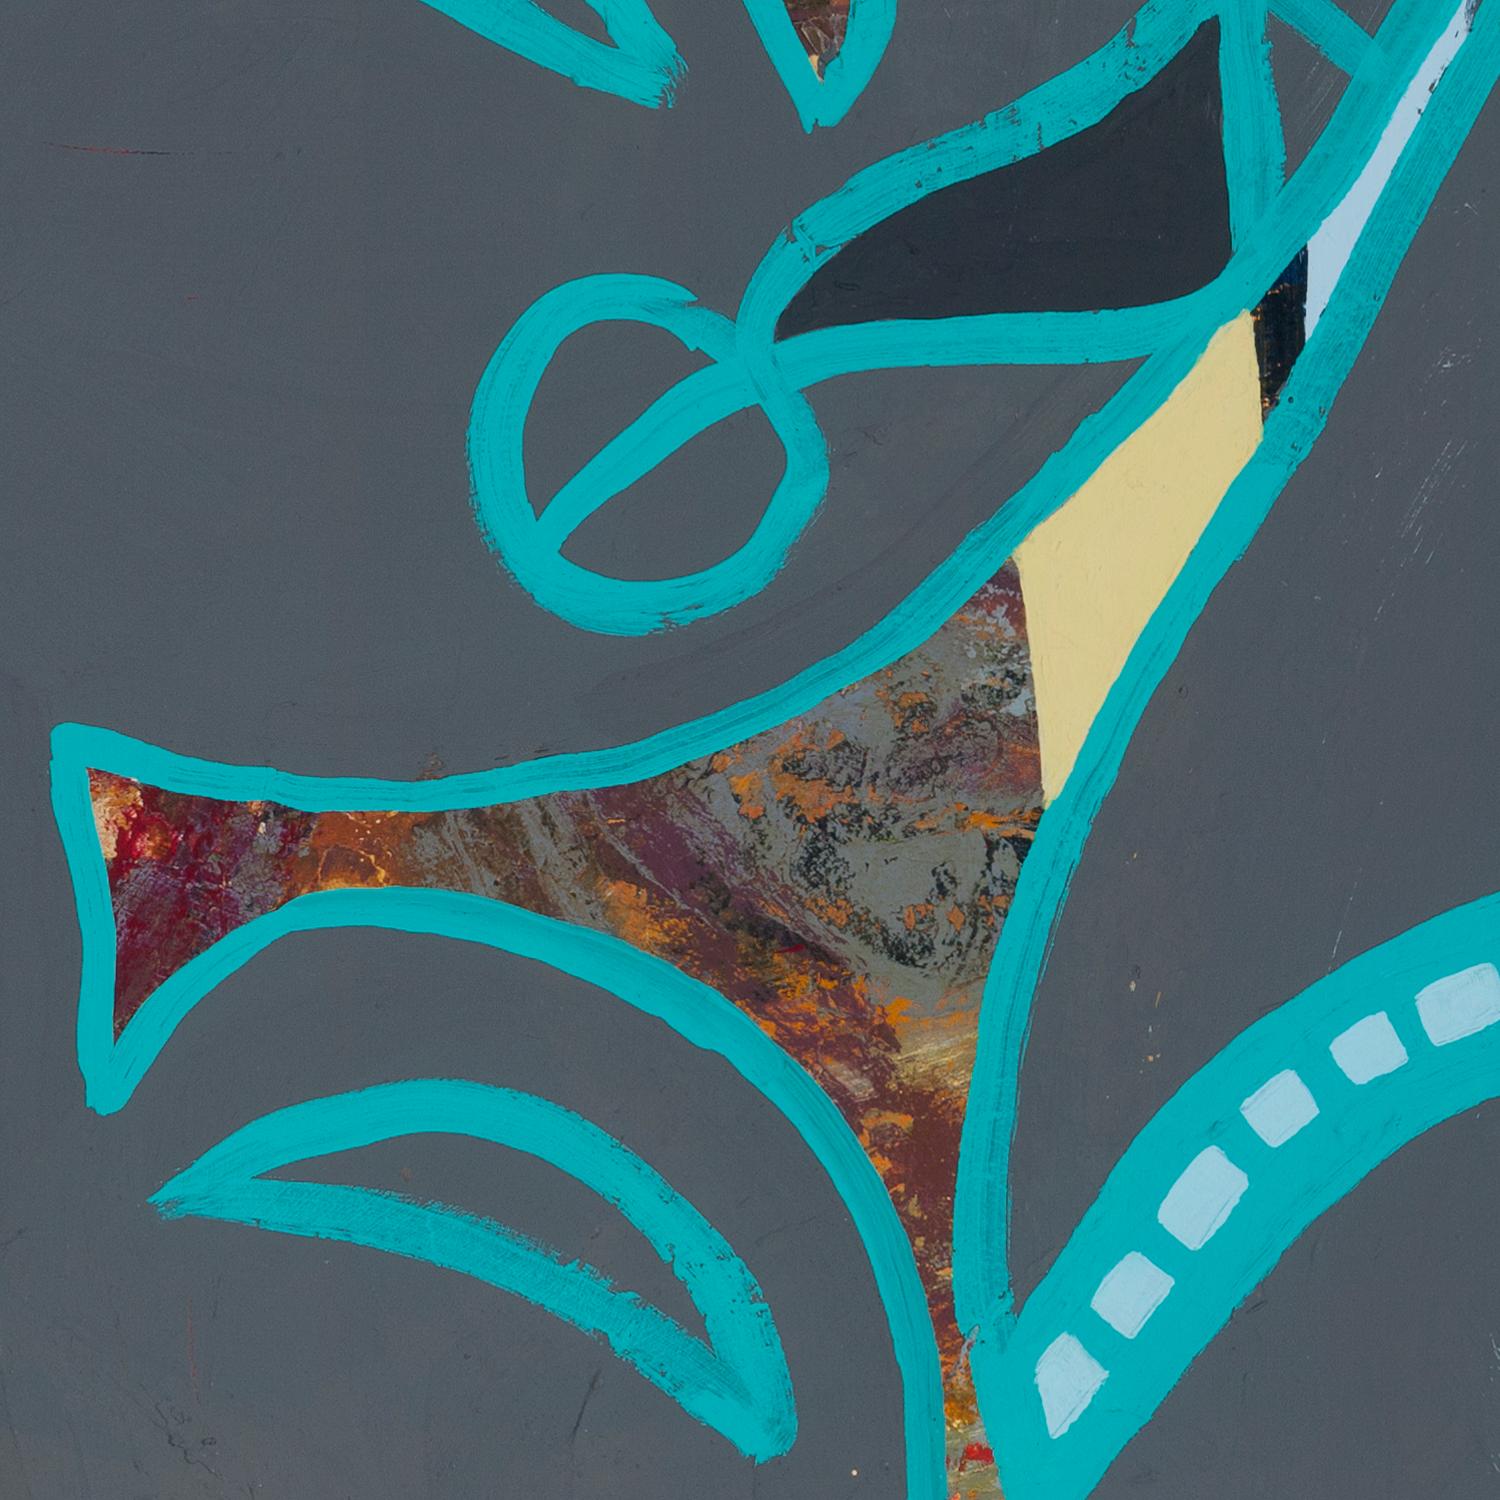 Melissa Shaak’s “Through Lines” is a 26 x 40 x 2 inch acrylic painting, with collaged images of tigers, on paper mounted on cradled board. The large, flat grey swaths outlined in teal appear myth-like, and the core of the piece is the interplay of